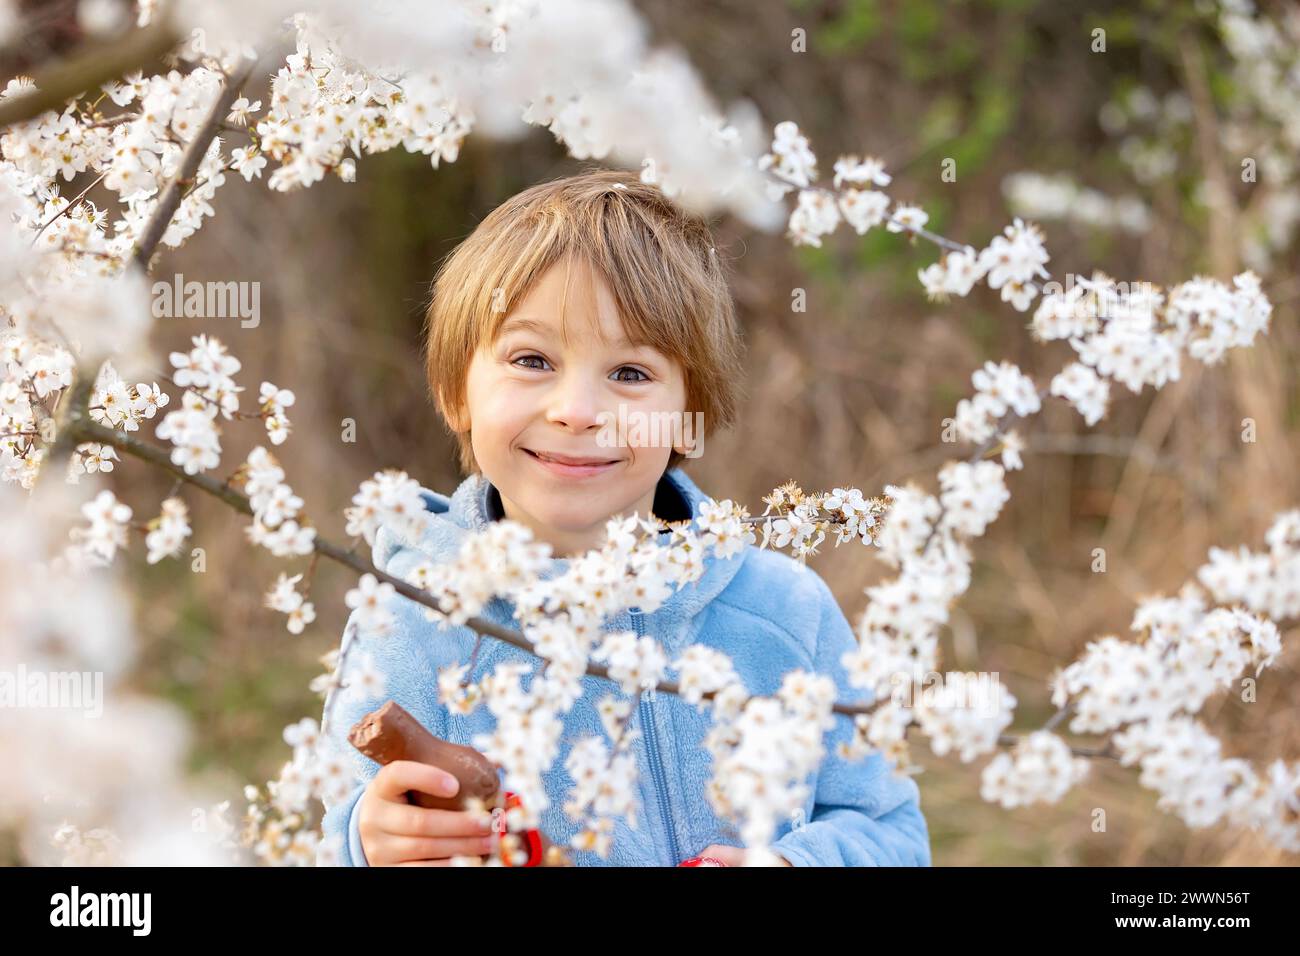 Beautiful blond child, boy, holding twig, braided whip made from pussy willow, traditional symbol of Czech Easter used for whipping girls and basket w Stock Photo